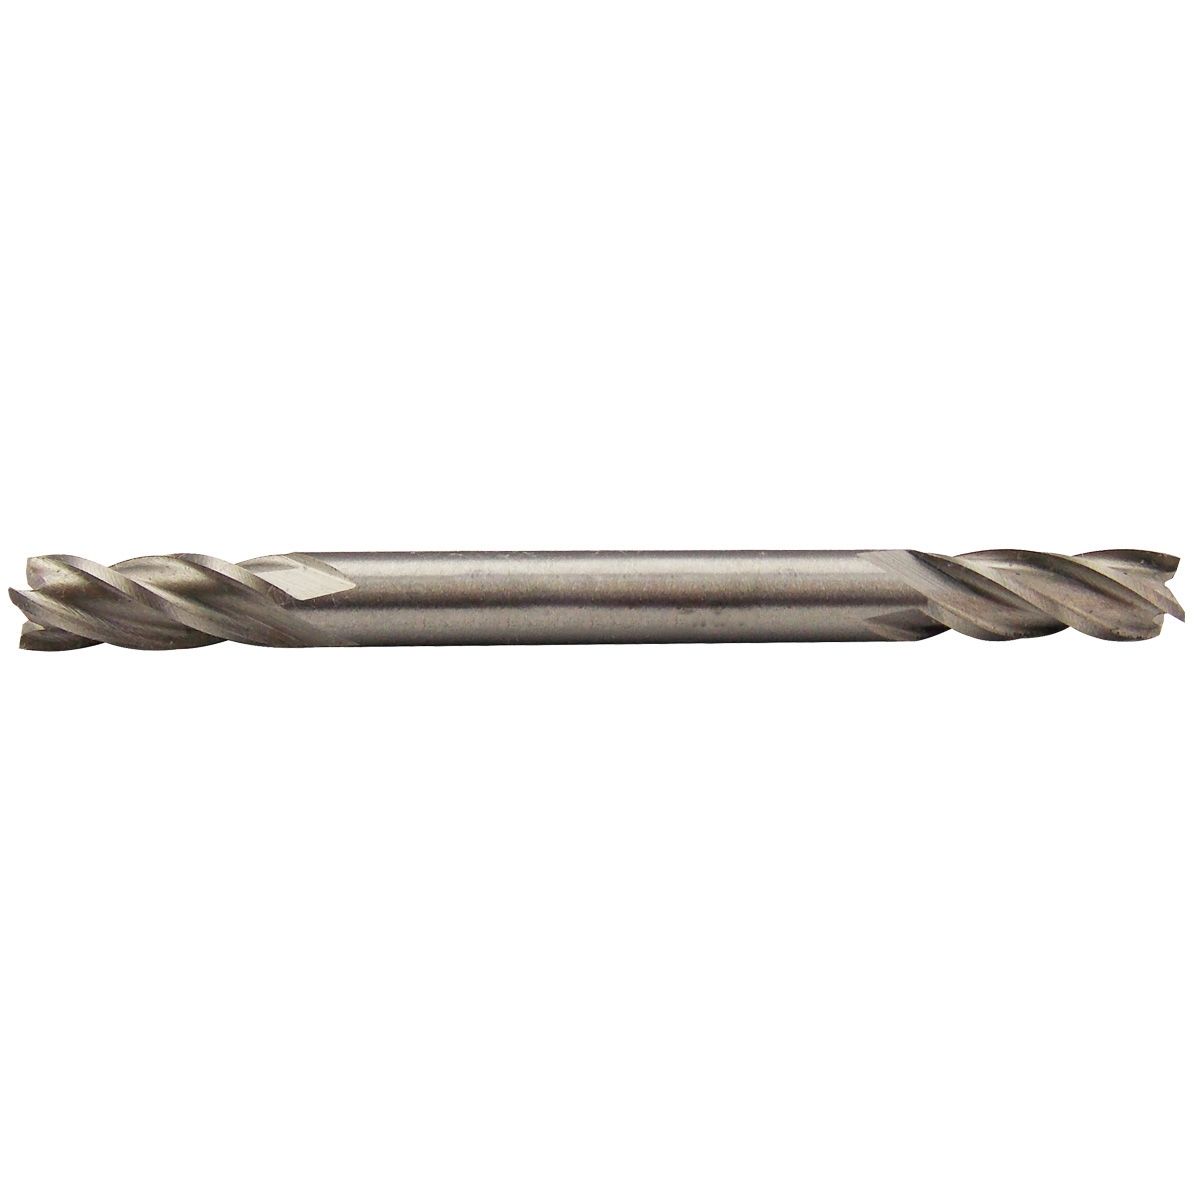 7/64" 4 FLUTE MINI HIGH SPEED STEEL DOUBLE END END MILL (5831-0024)